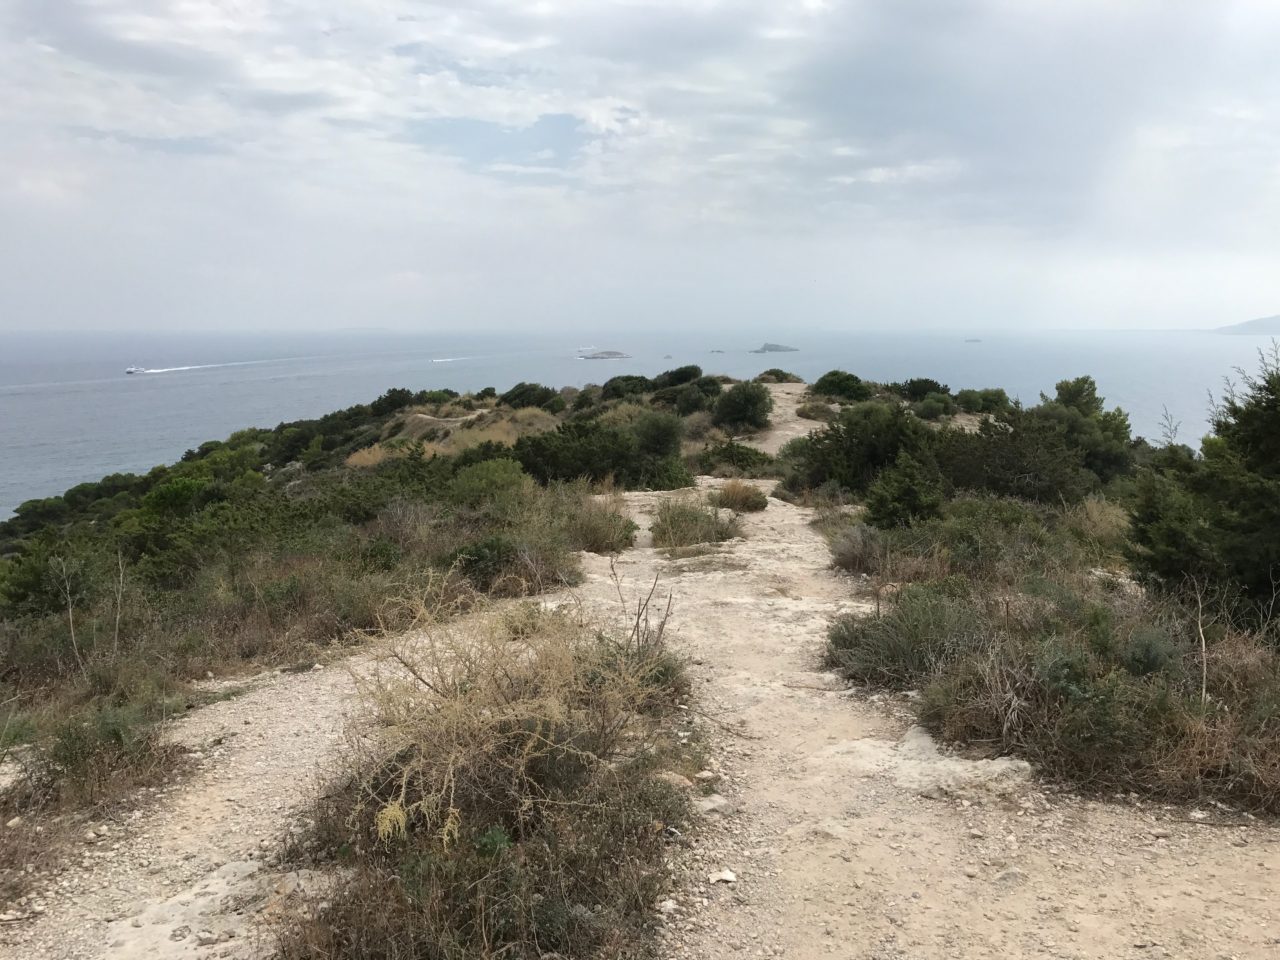 Mountain Dirt Pathway With Brush And Grass By The Ocean